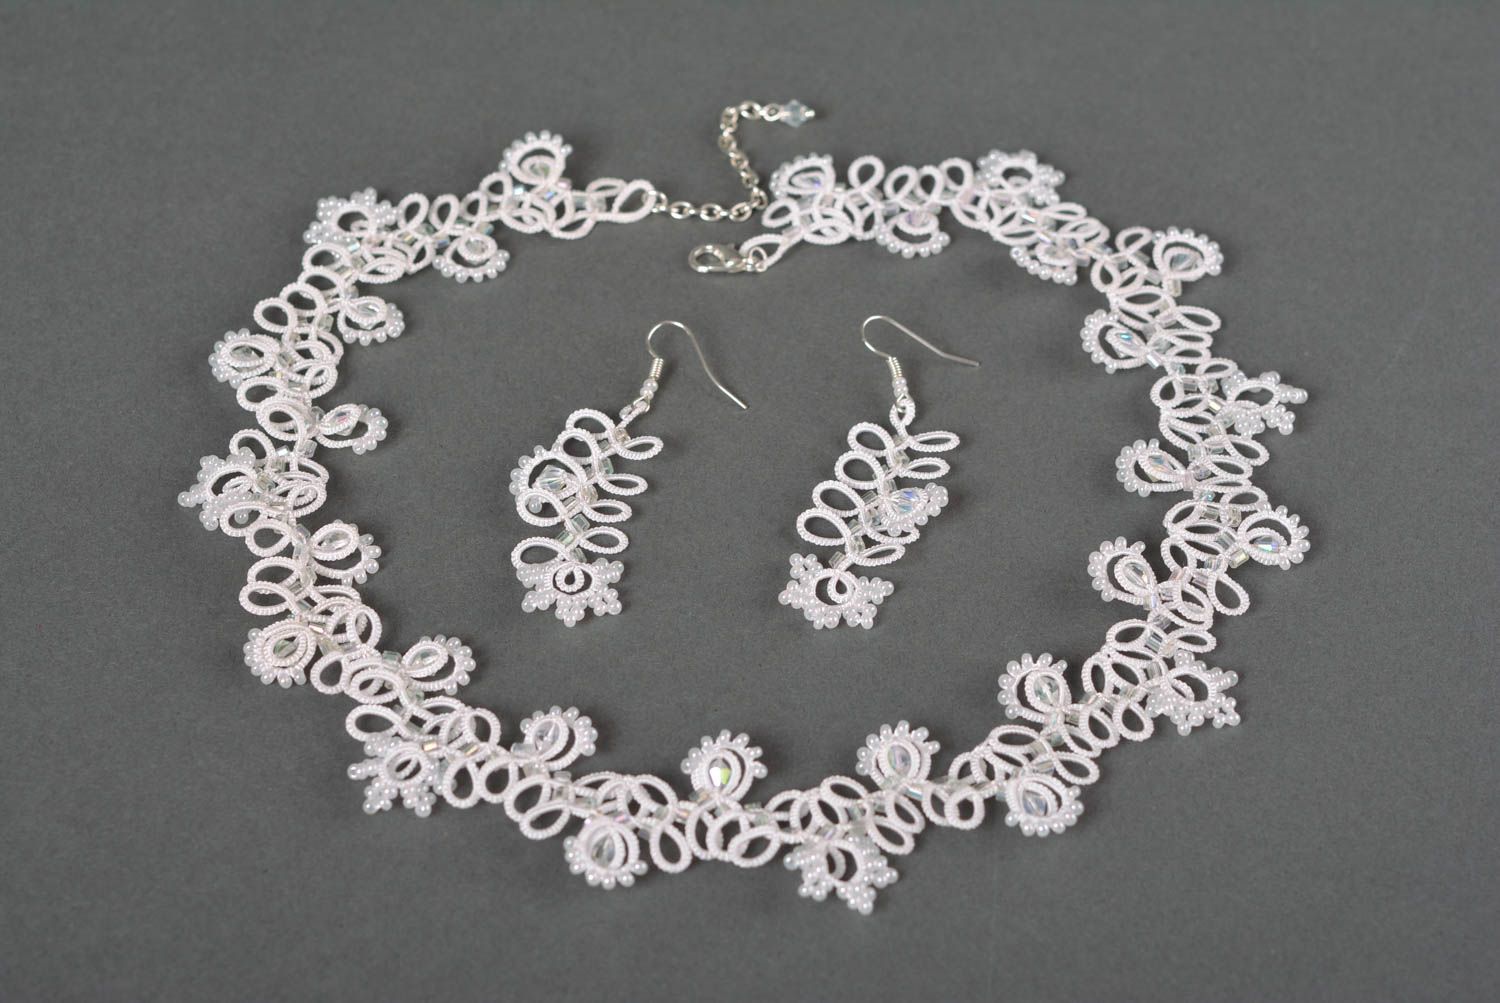 Handmade jewelry set fashion necklace long earrings tatting lace gifts for her photo 1